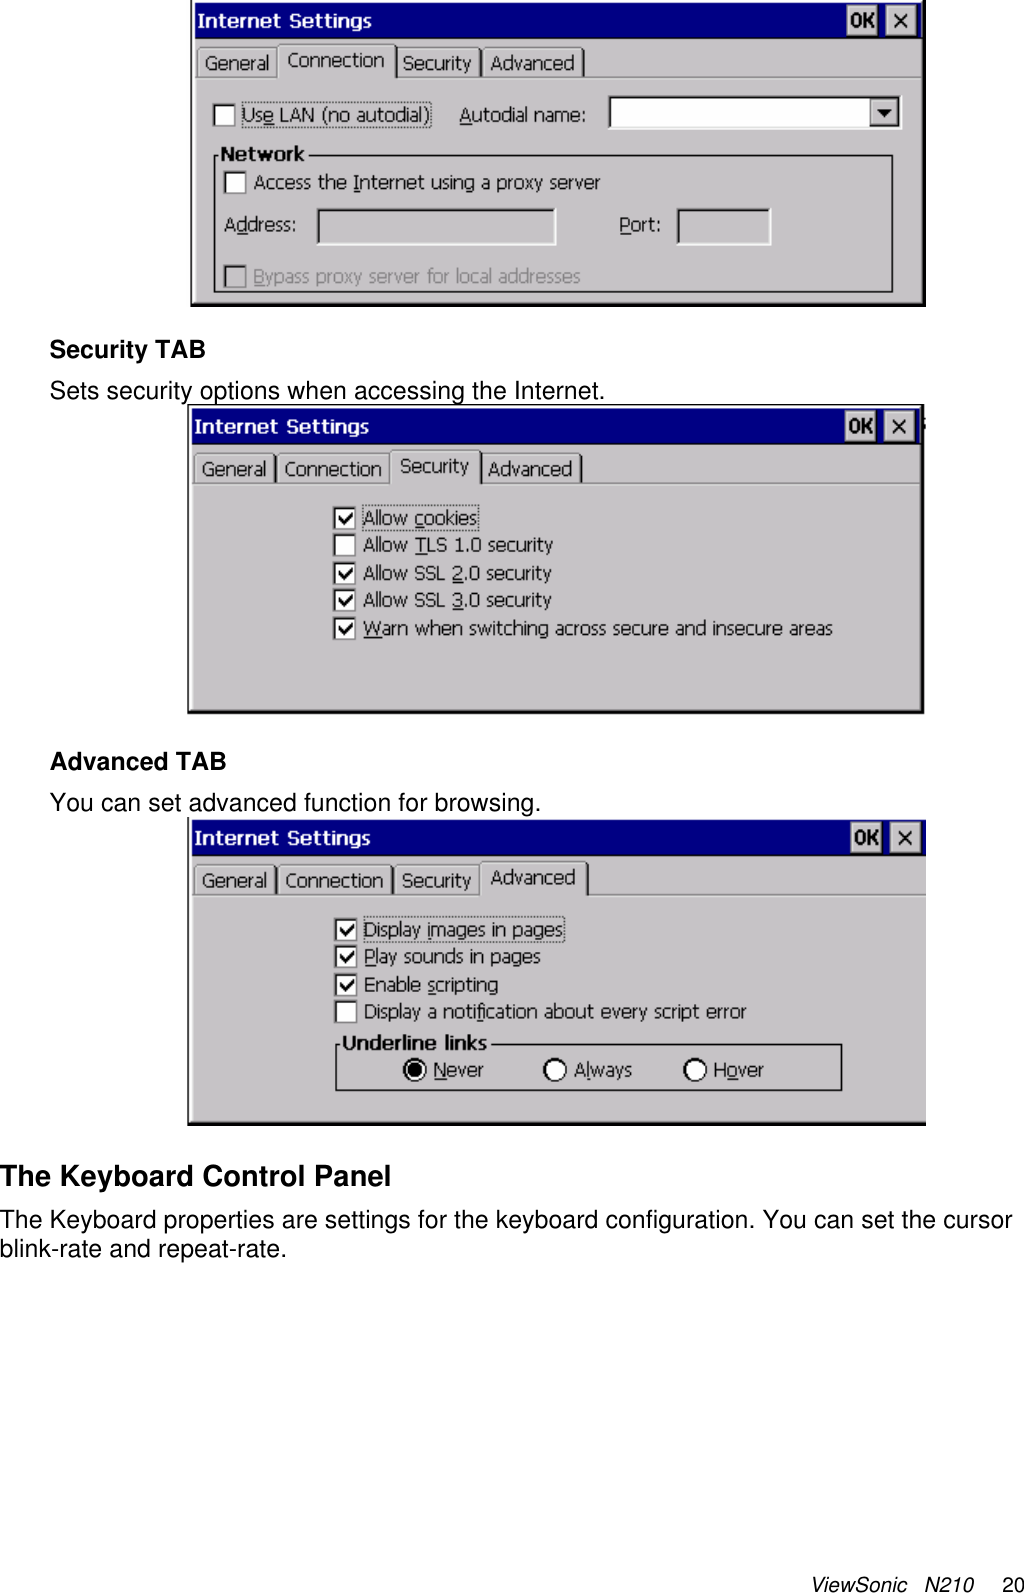 ViewSonic   N210     20   Security TAB Sets security options when accessing the Internet.   Advanced TAB You can set advanced function for browsing.   The Keyboard Control Panel The Keyboard properties are settings for the keyboard configuration. You can set the cursor blink-rate and repeat-rate. 